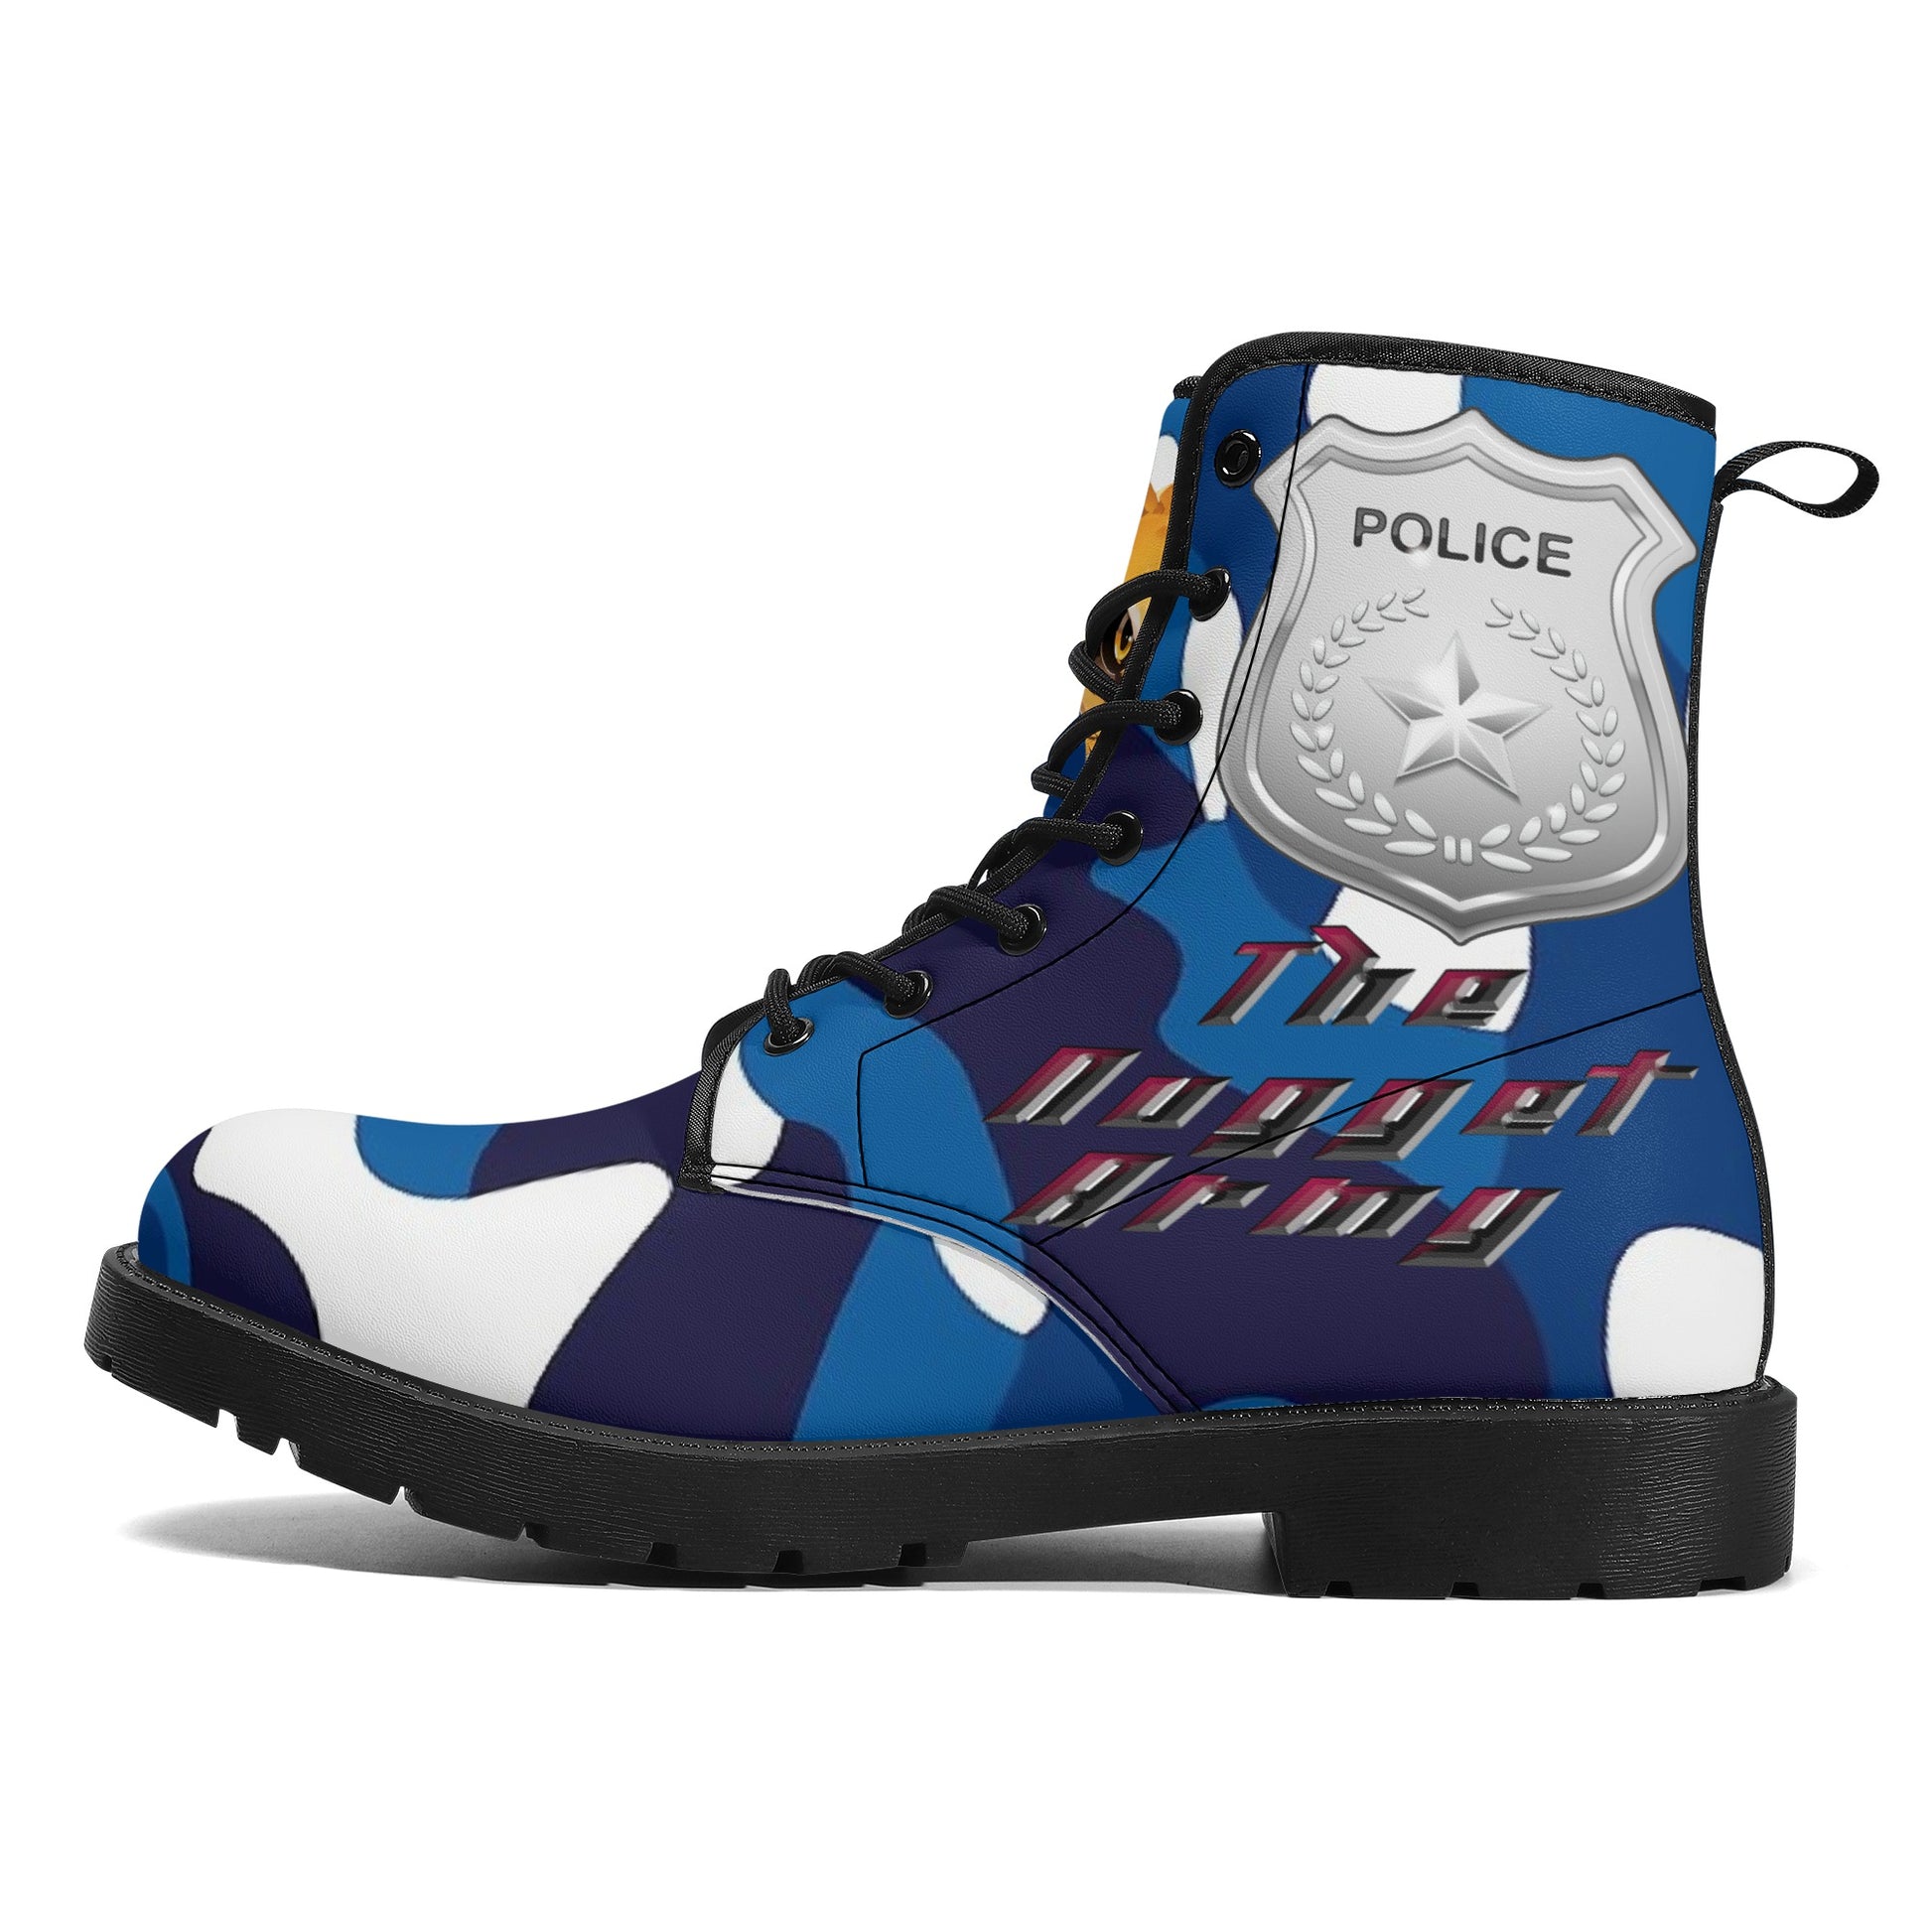 Stand out  with the  Nugget Army Police Womens Leather Boots  available at Hey Nugget. Grab yours today!